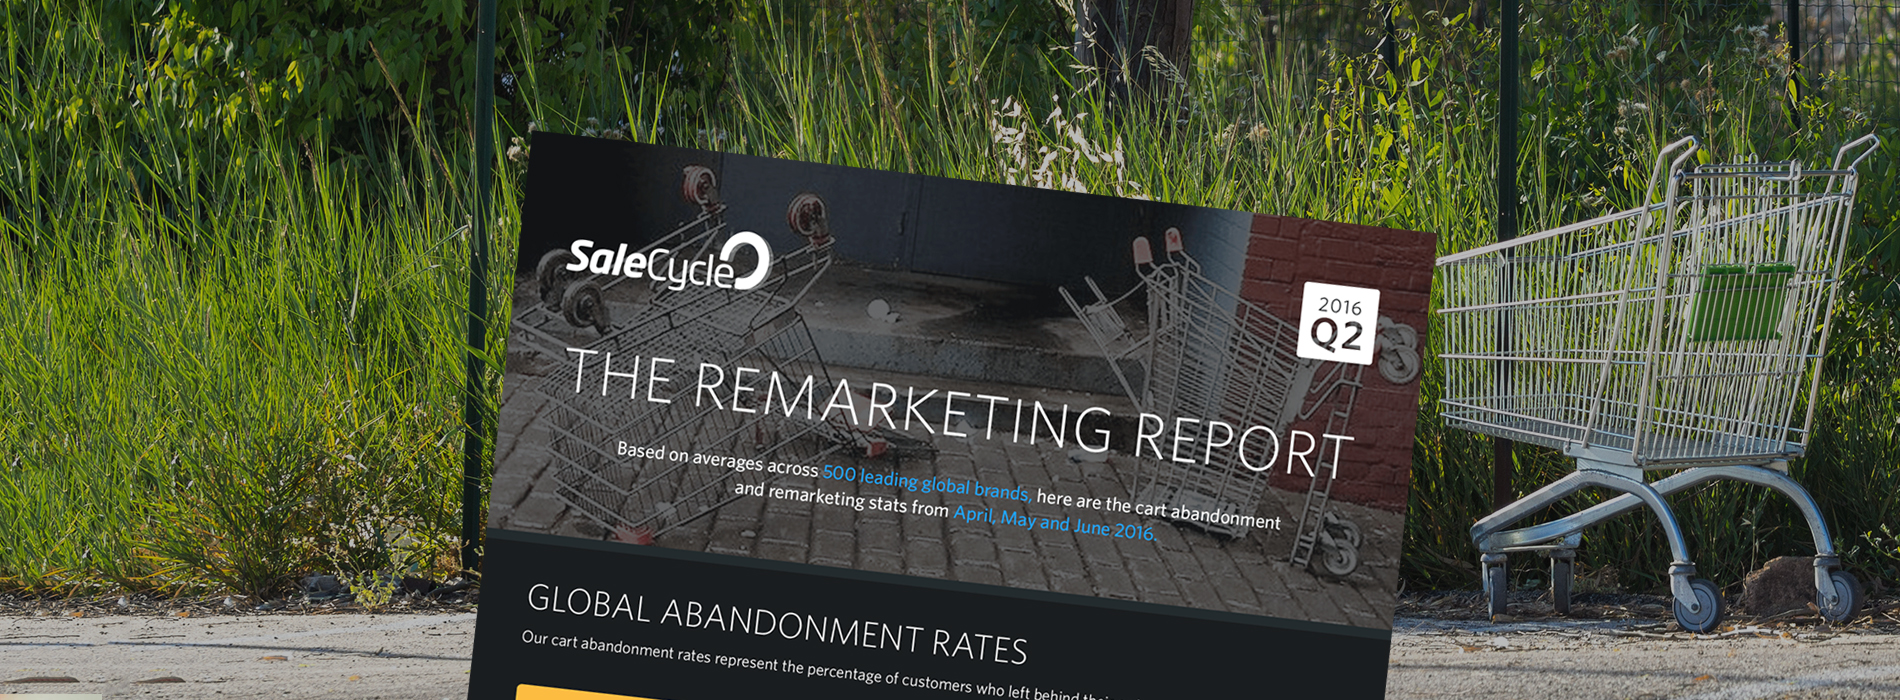 [Infographic] The Remarketing Report – Q2 2016